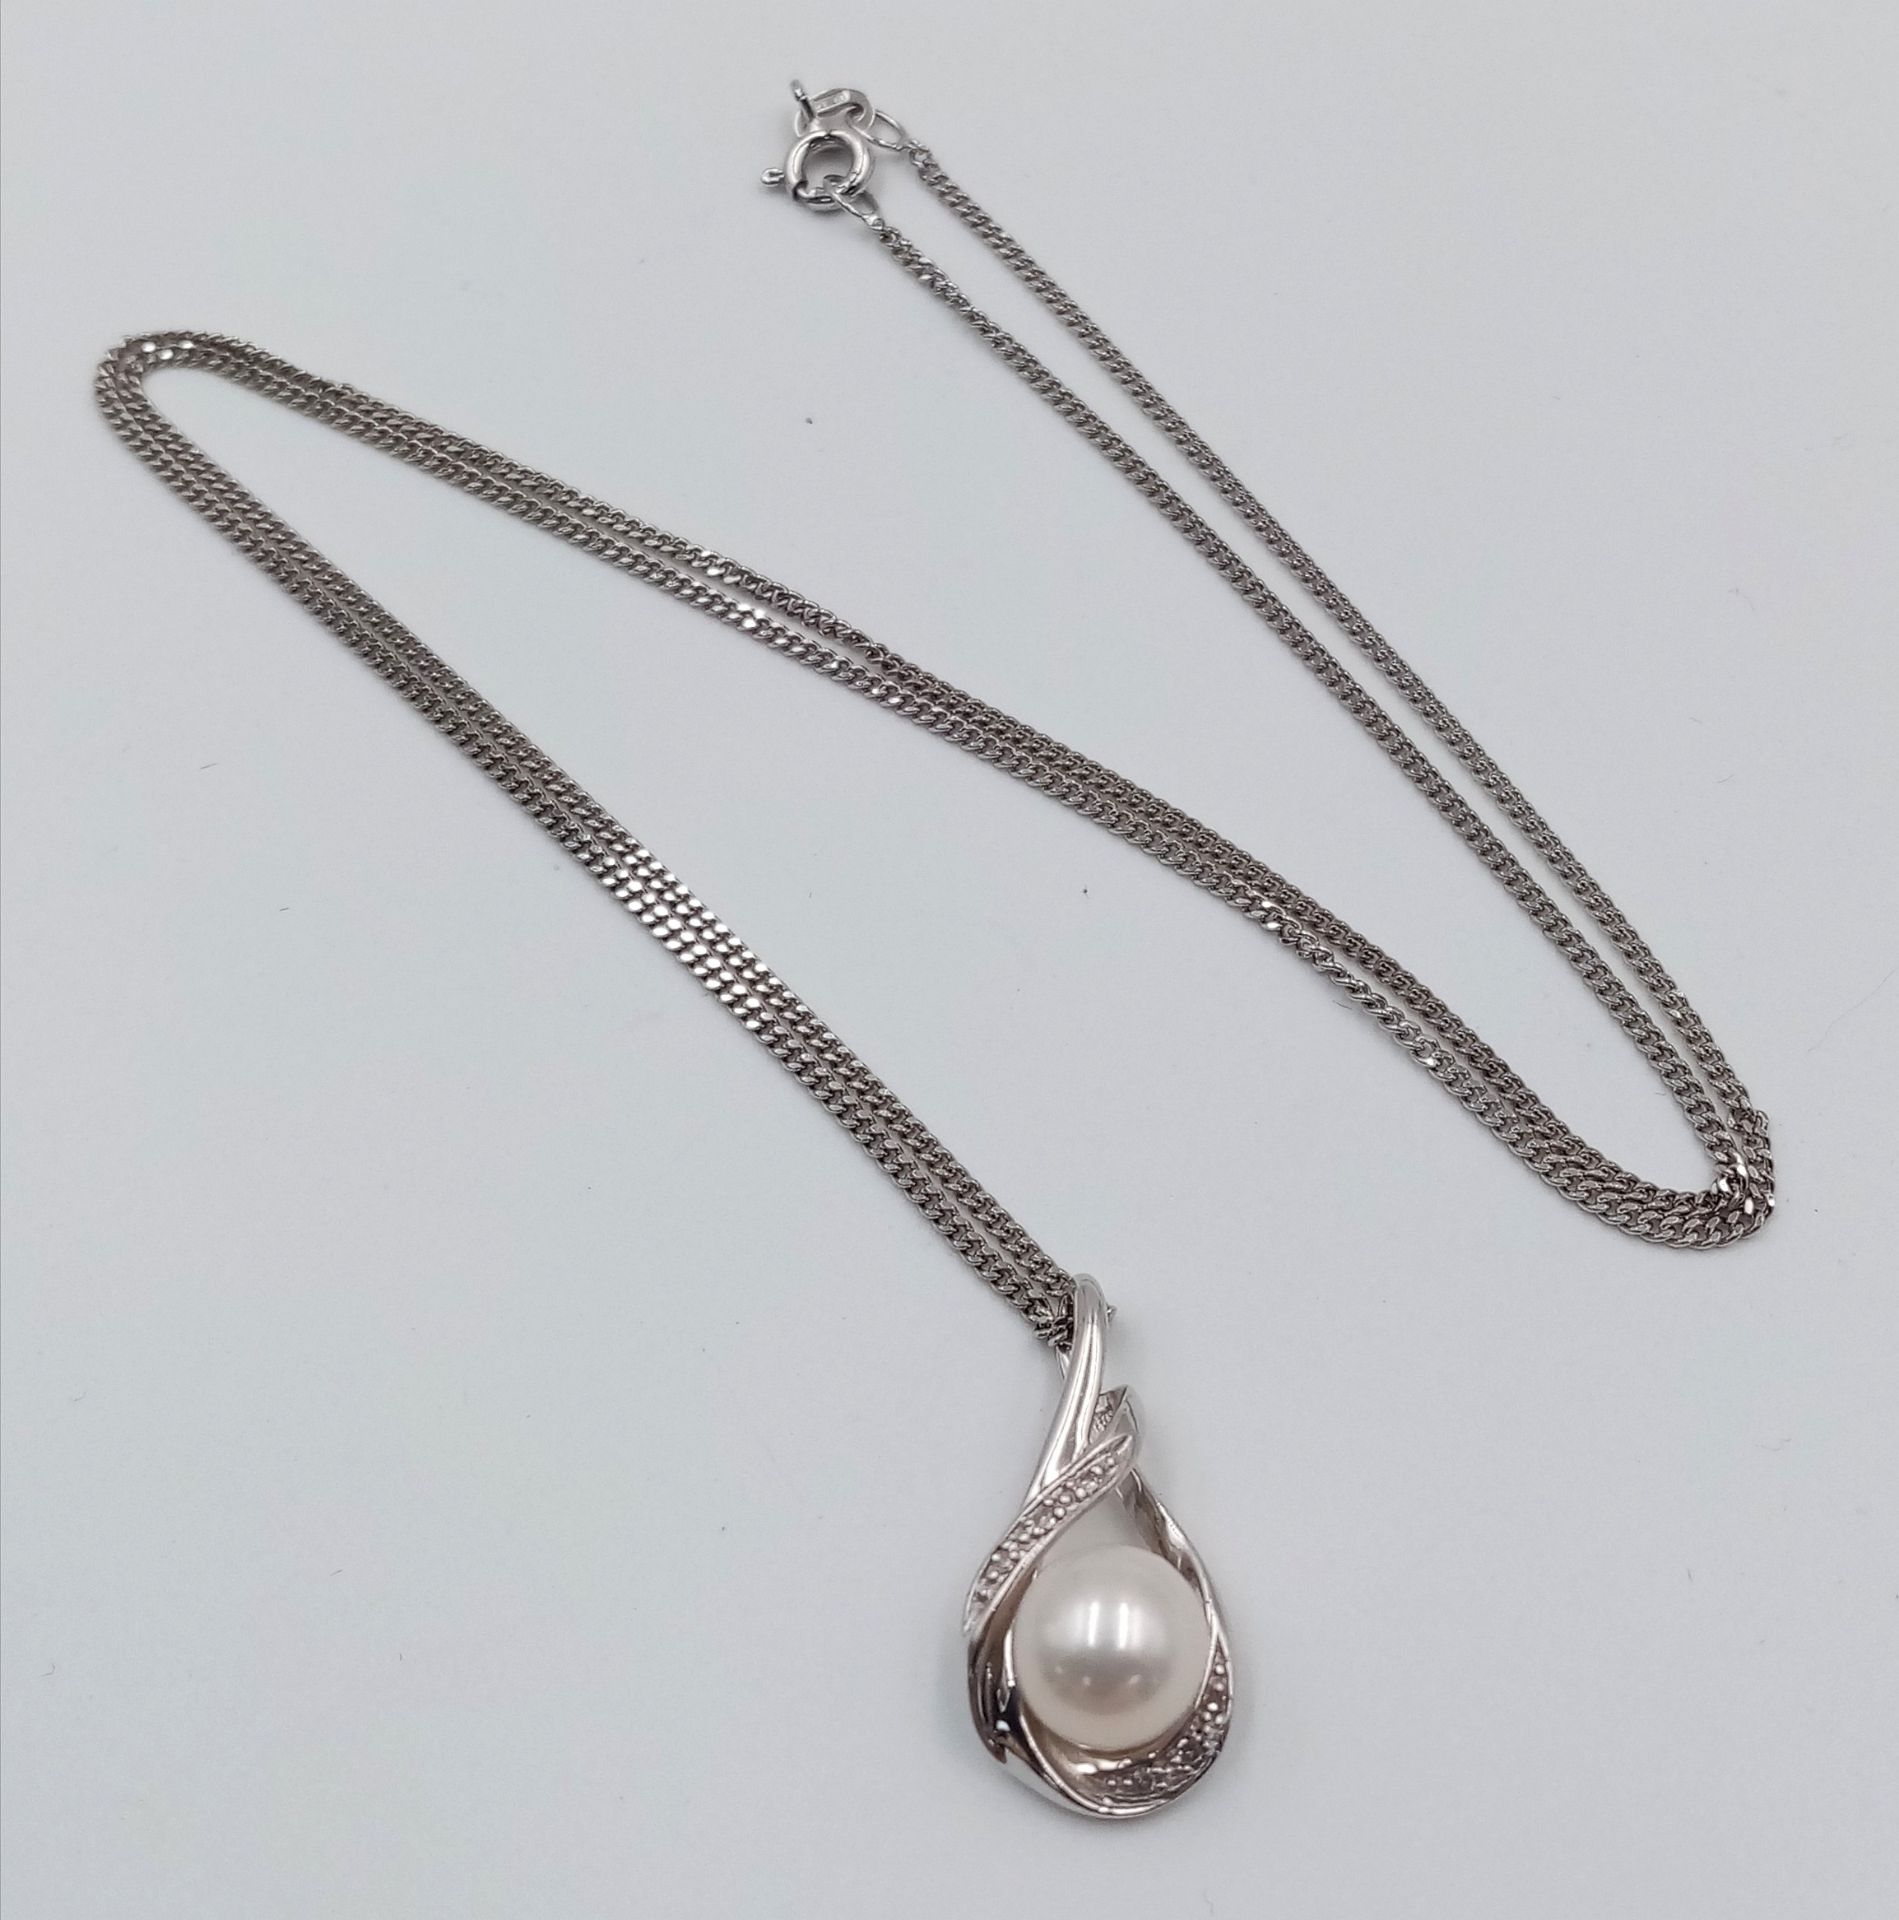 A 9ct White Gold Diamond and Pearl Necklace, 6mm pearl size, 0.05ct diamond, 20” chain length, 4.